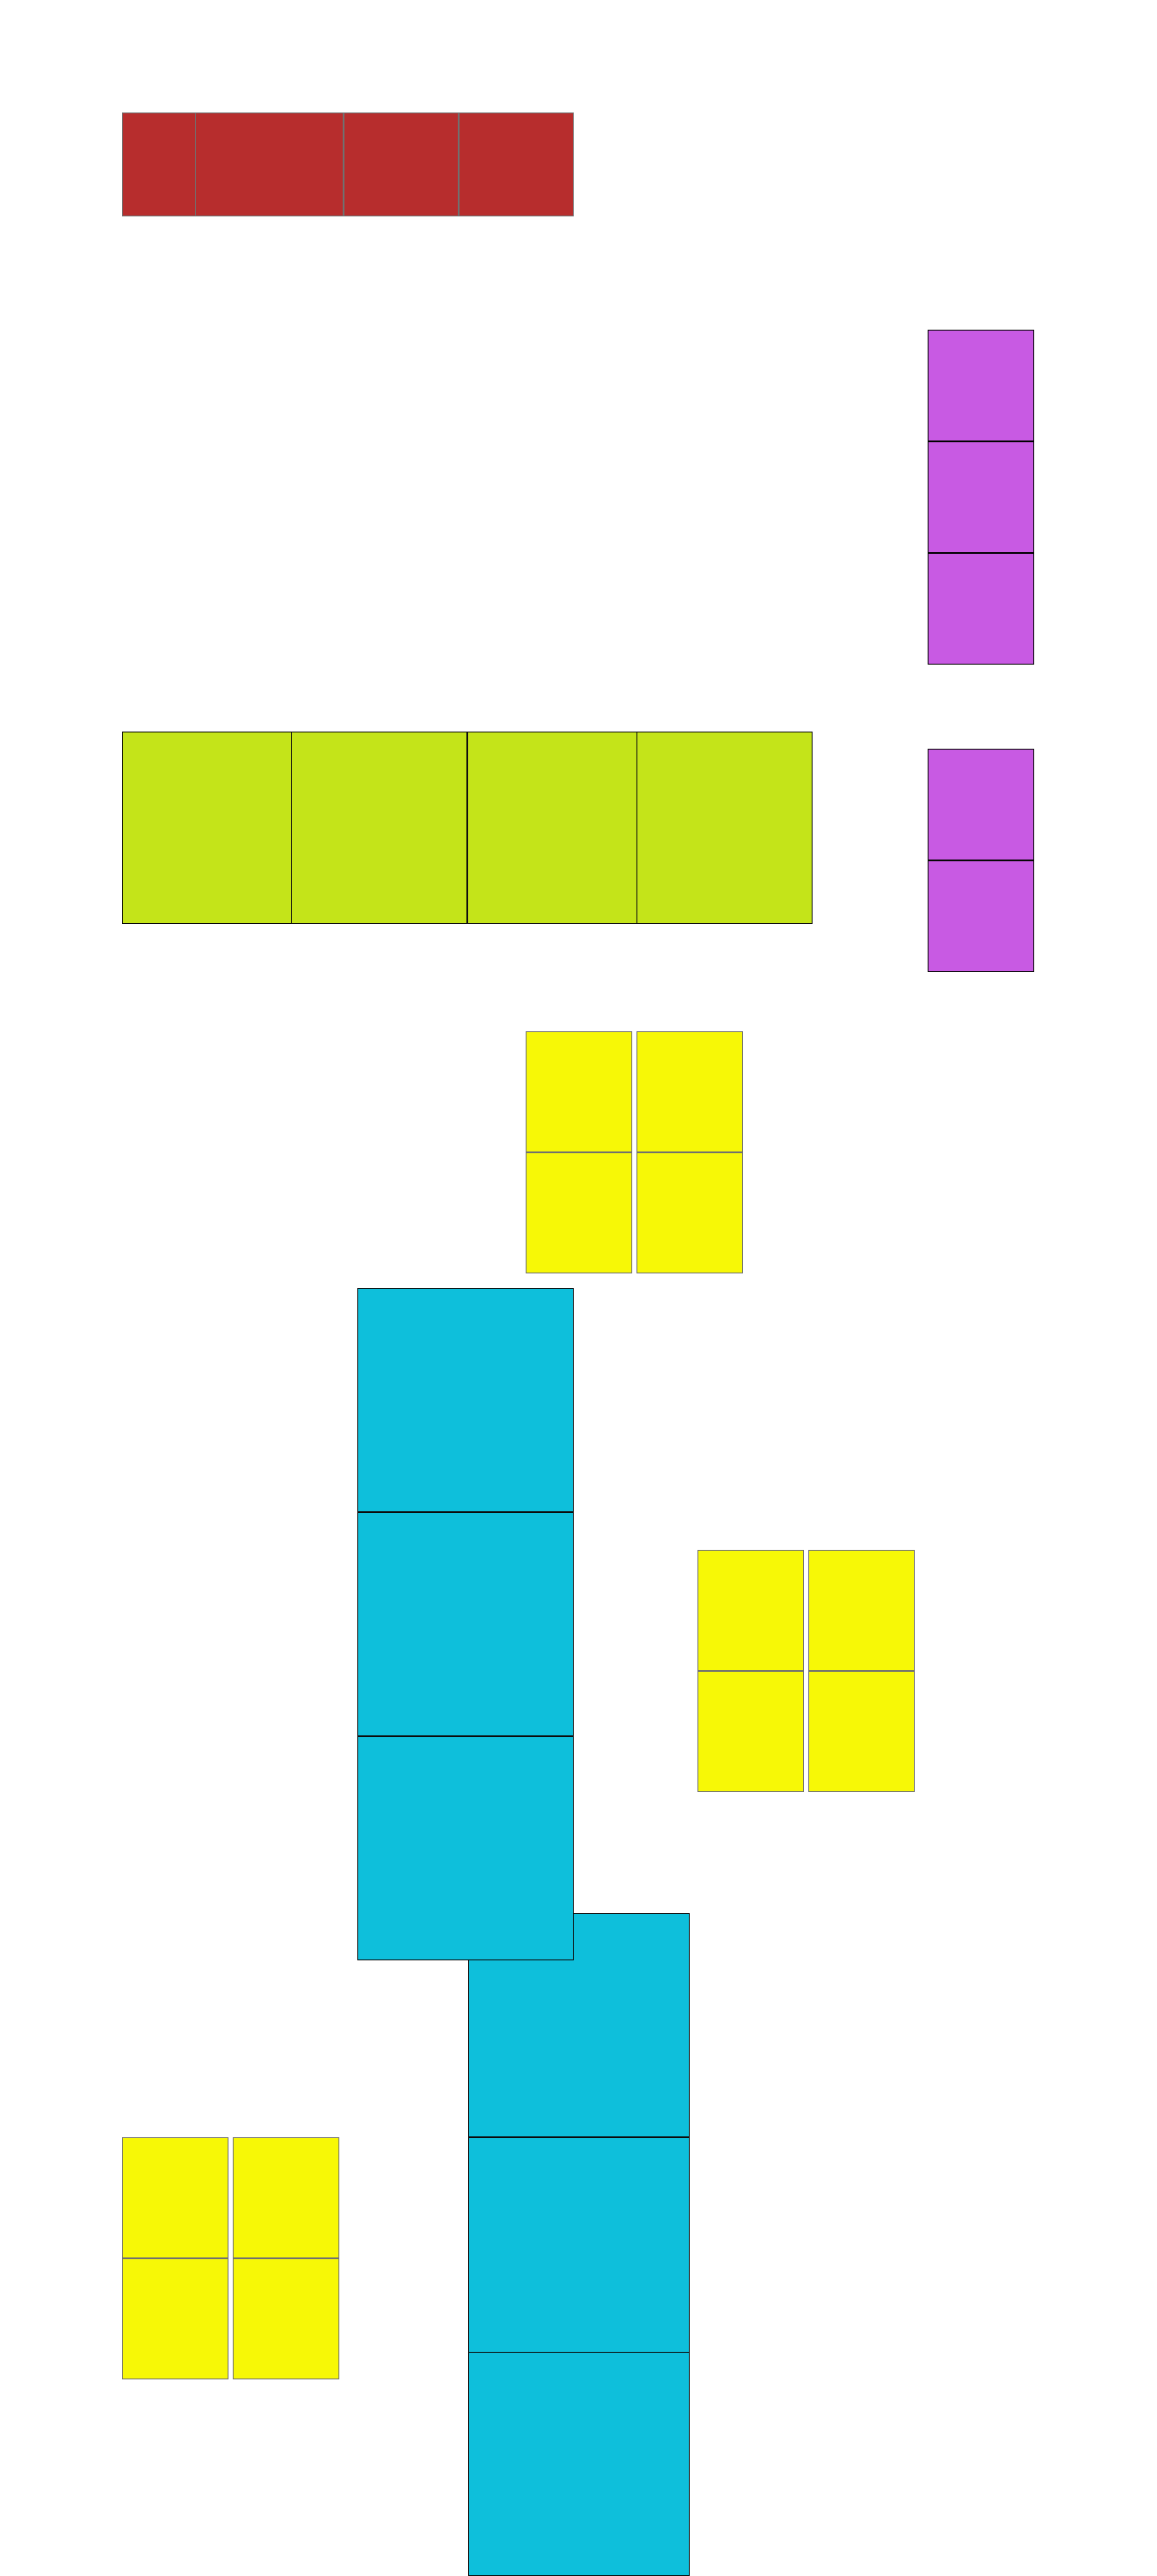 grid with multi-colored squares